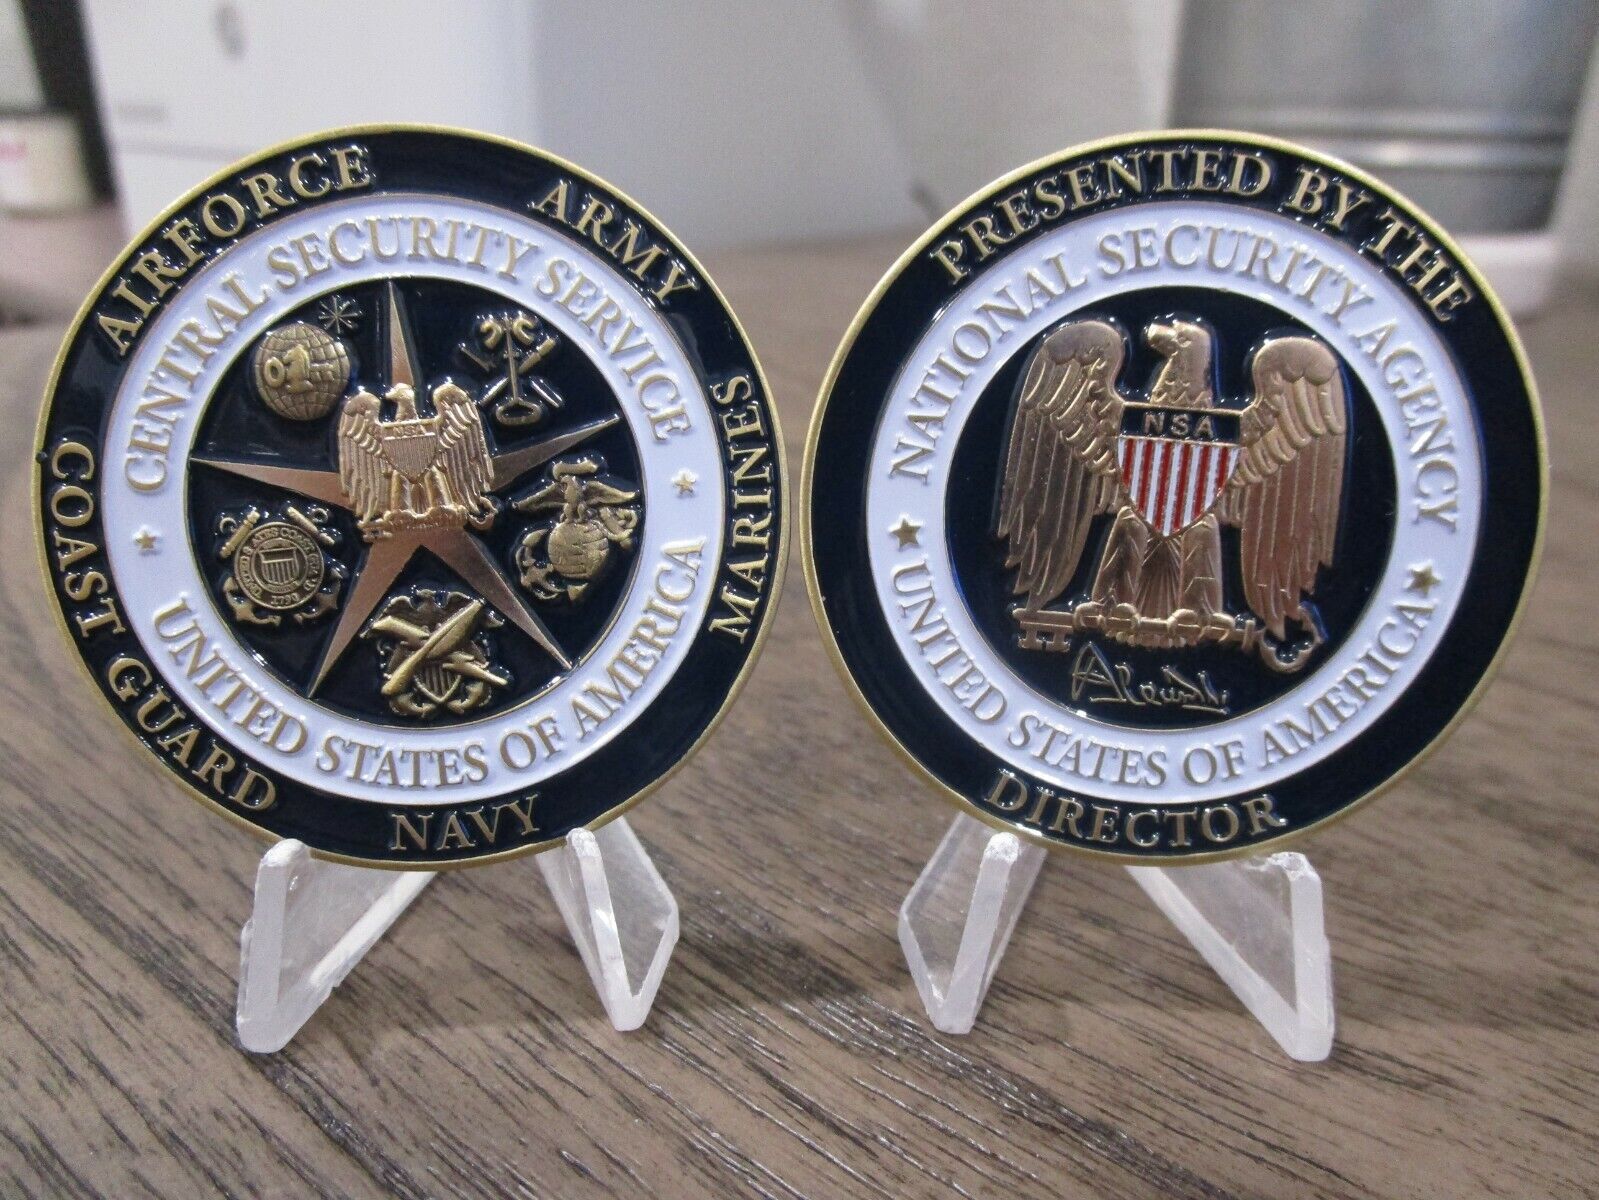 National Security Agency USAF Army USN CSS NSA Director's Challenge Coin